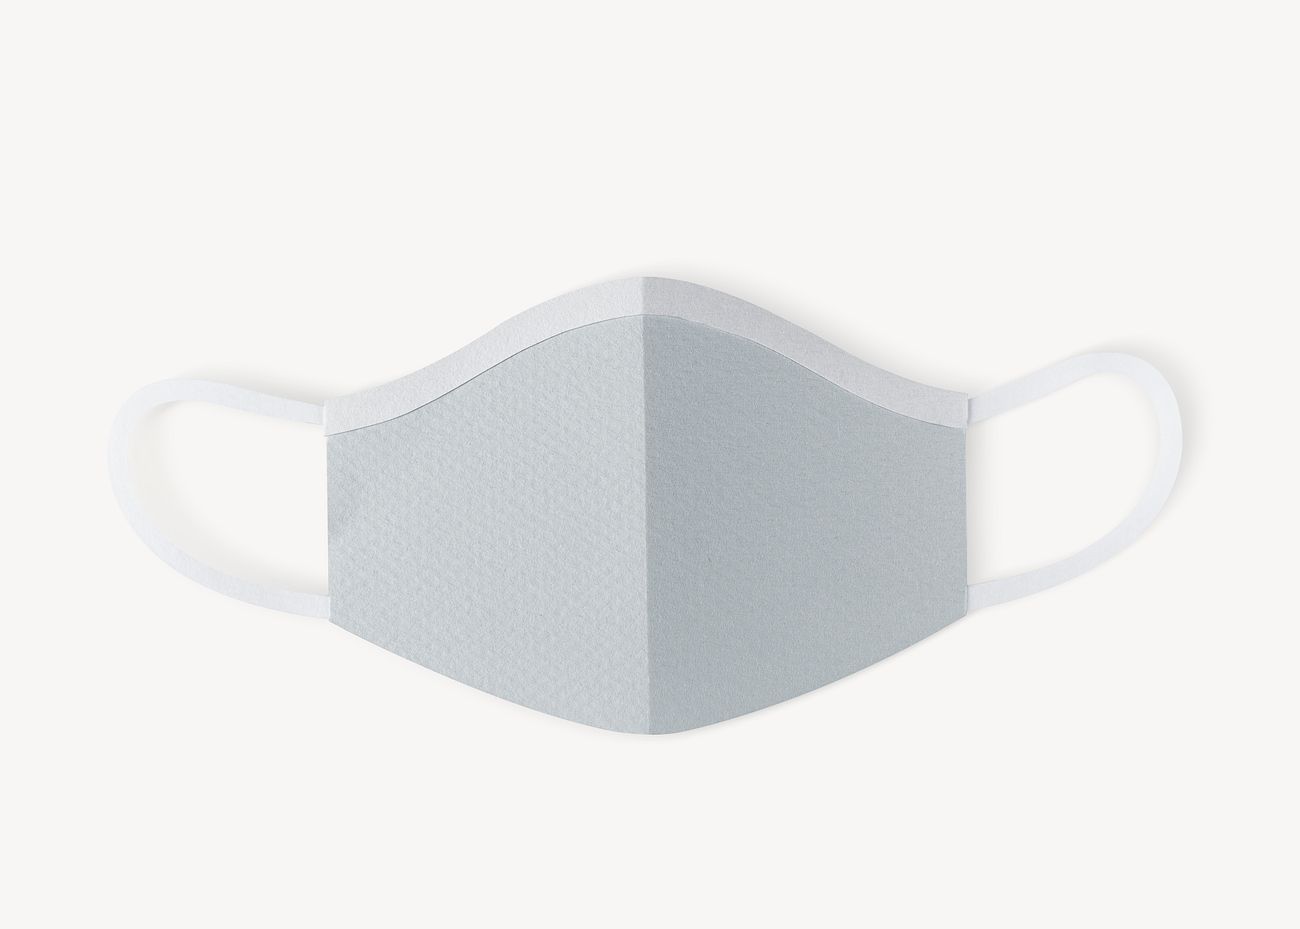 Paper craft surgical face mask on a white background mockup | Royalty free psd mockup - 2309383